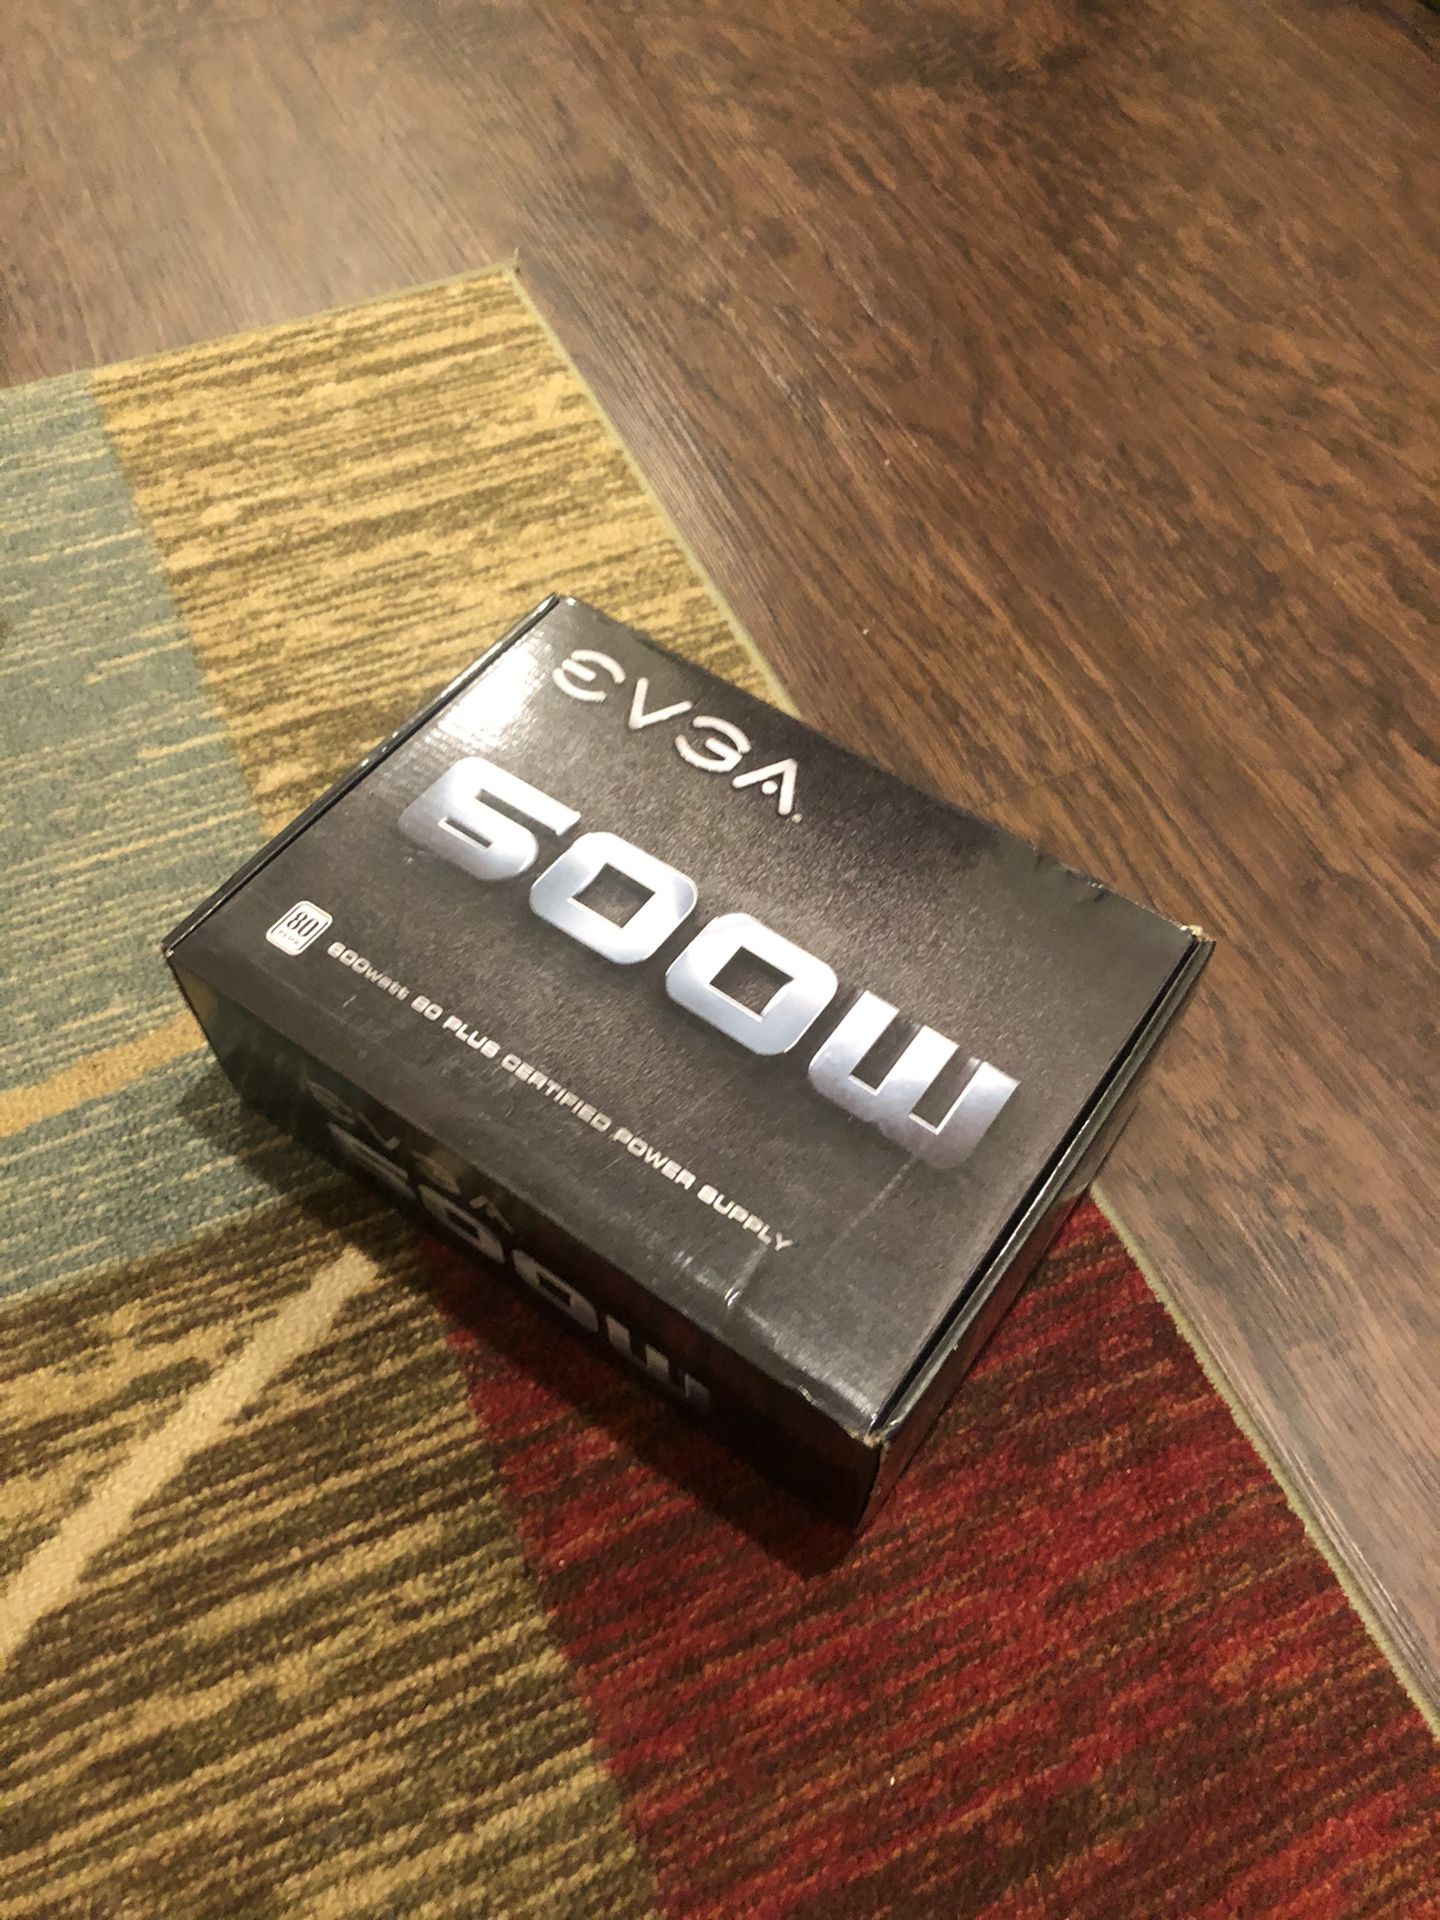 EVGA power supply 600w brand new pick up only $45